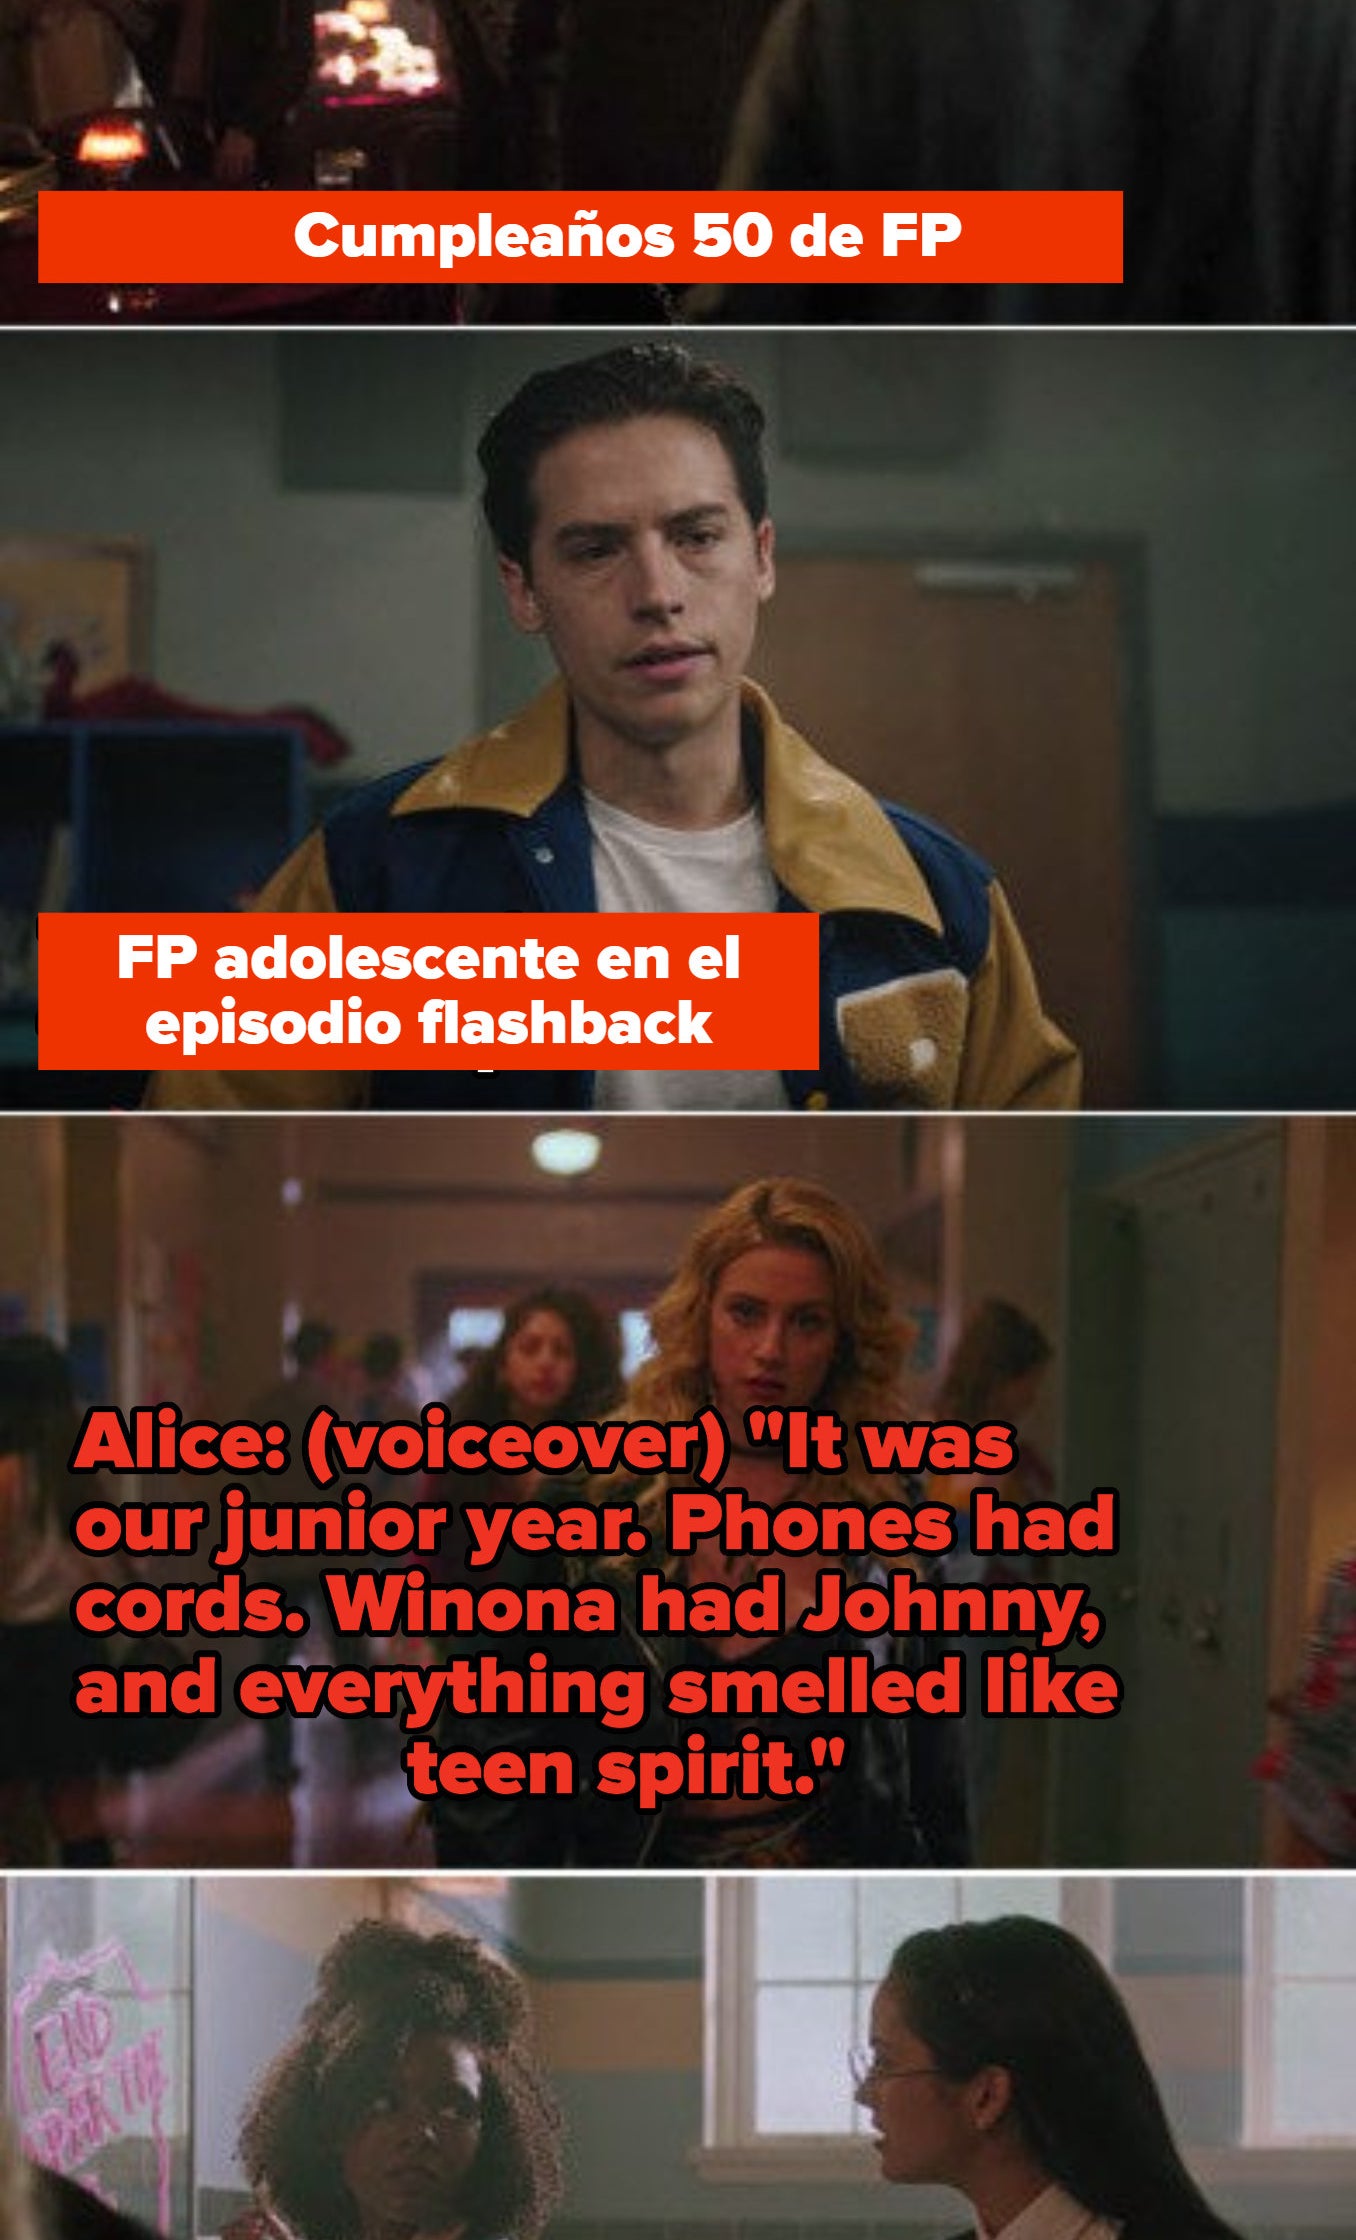 FP at his 50th birthday party and FP as a high school junior in the &#x27;90s flashback episode